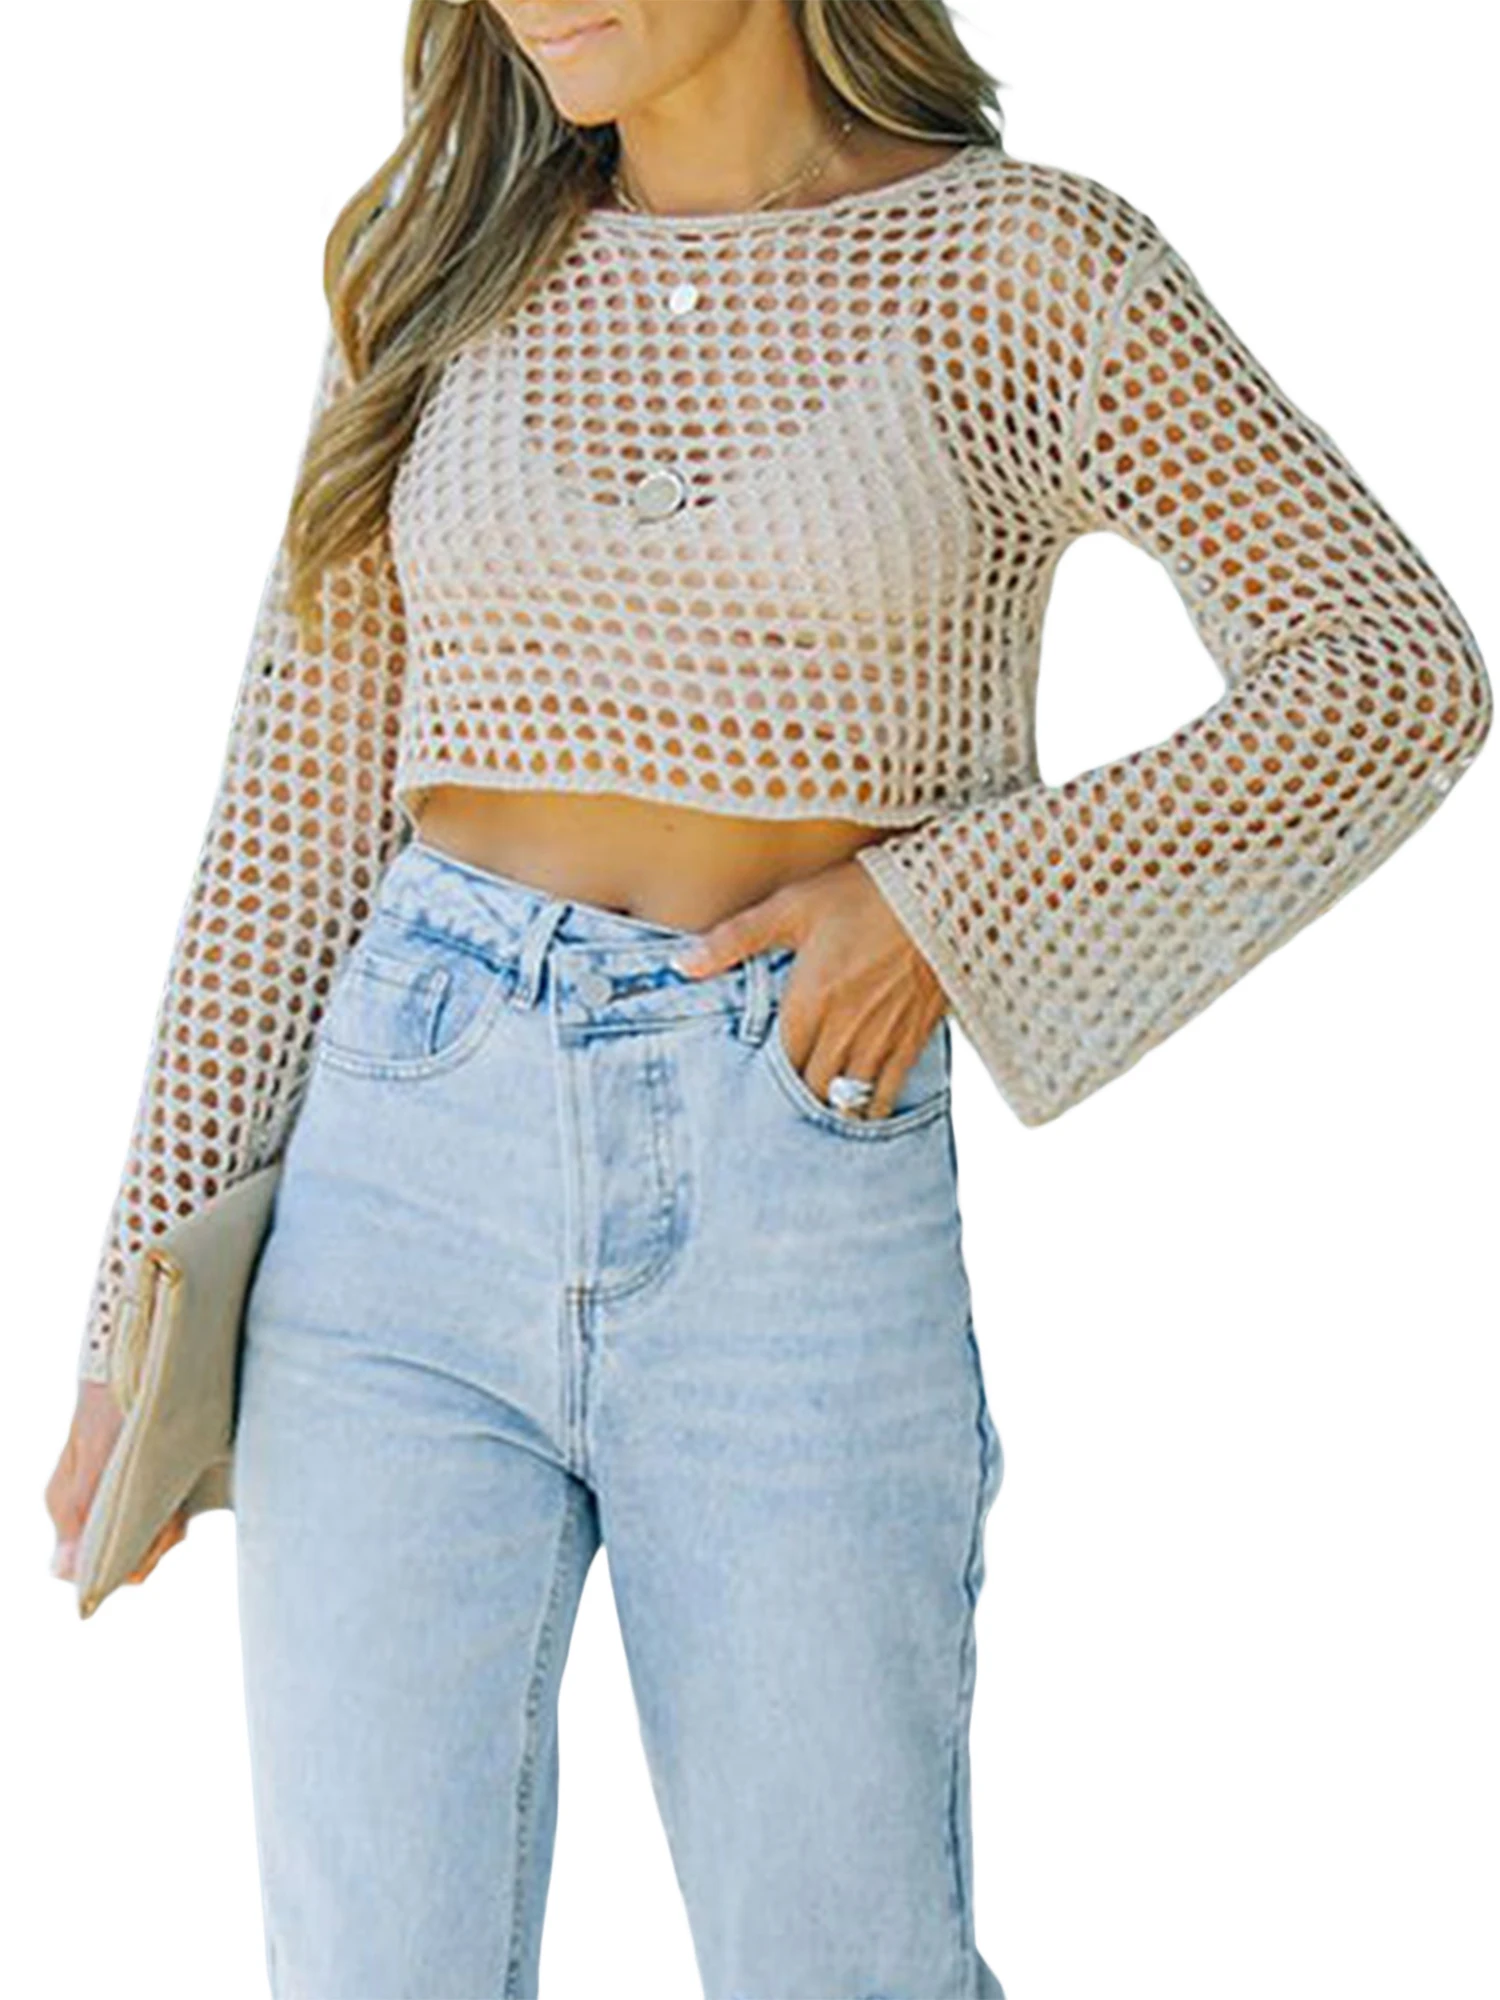 

Vintage-Inspired Crochet Knit Sweater with Cutout Details and Sheer Fabric - Y2K Fashion Long Sleeve Top for Casual or Clubwear